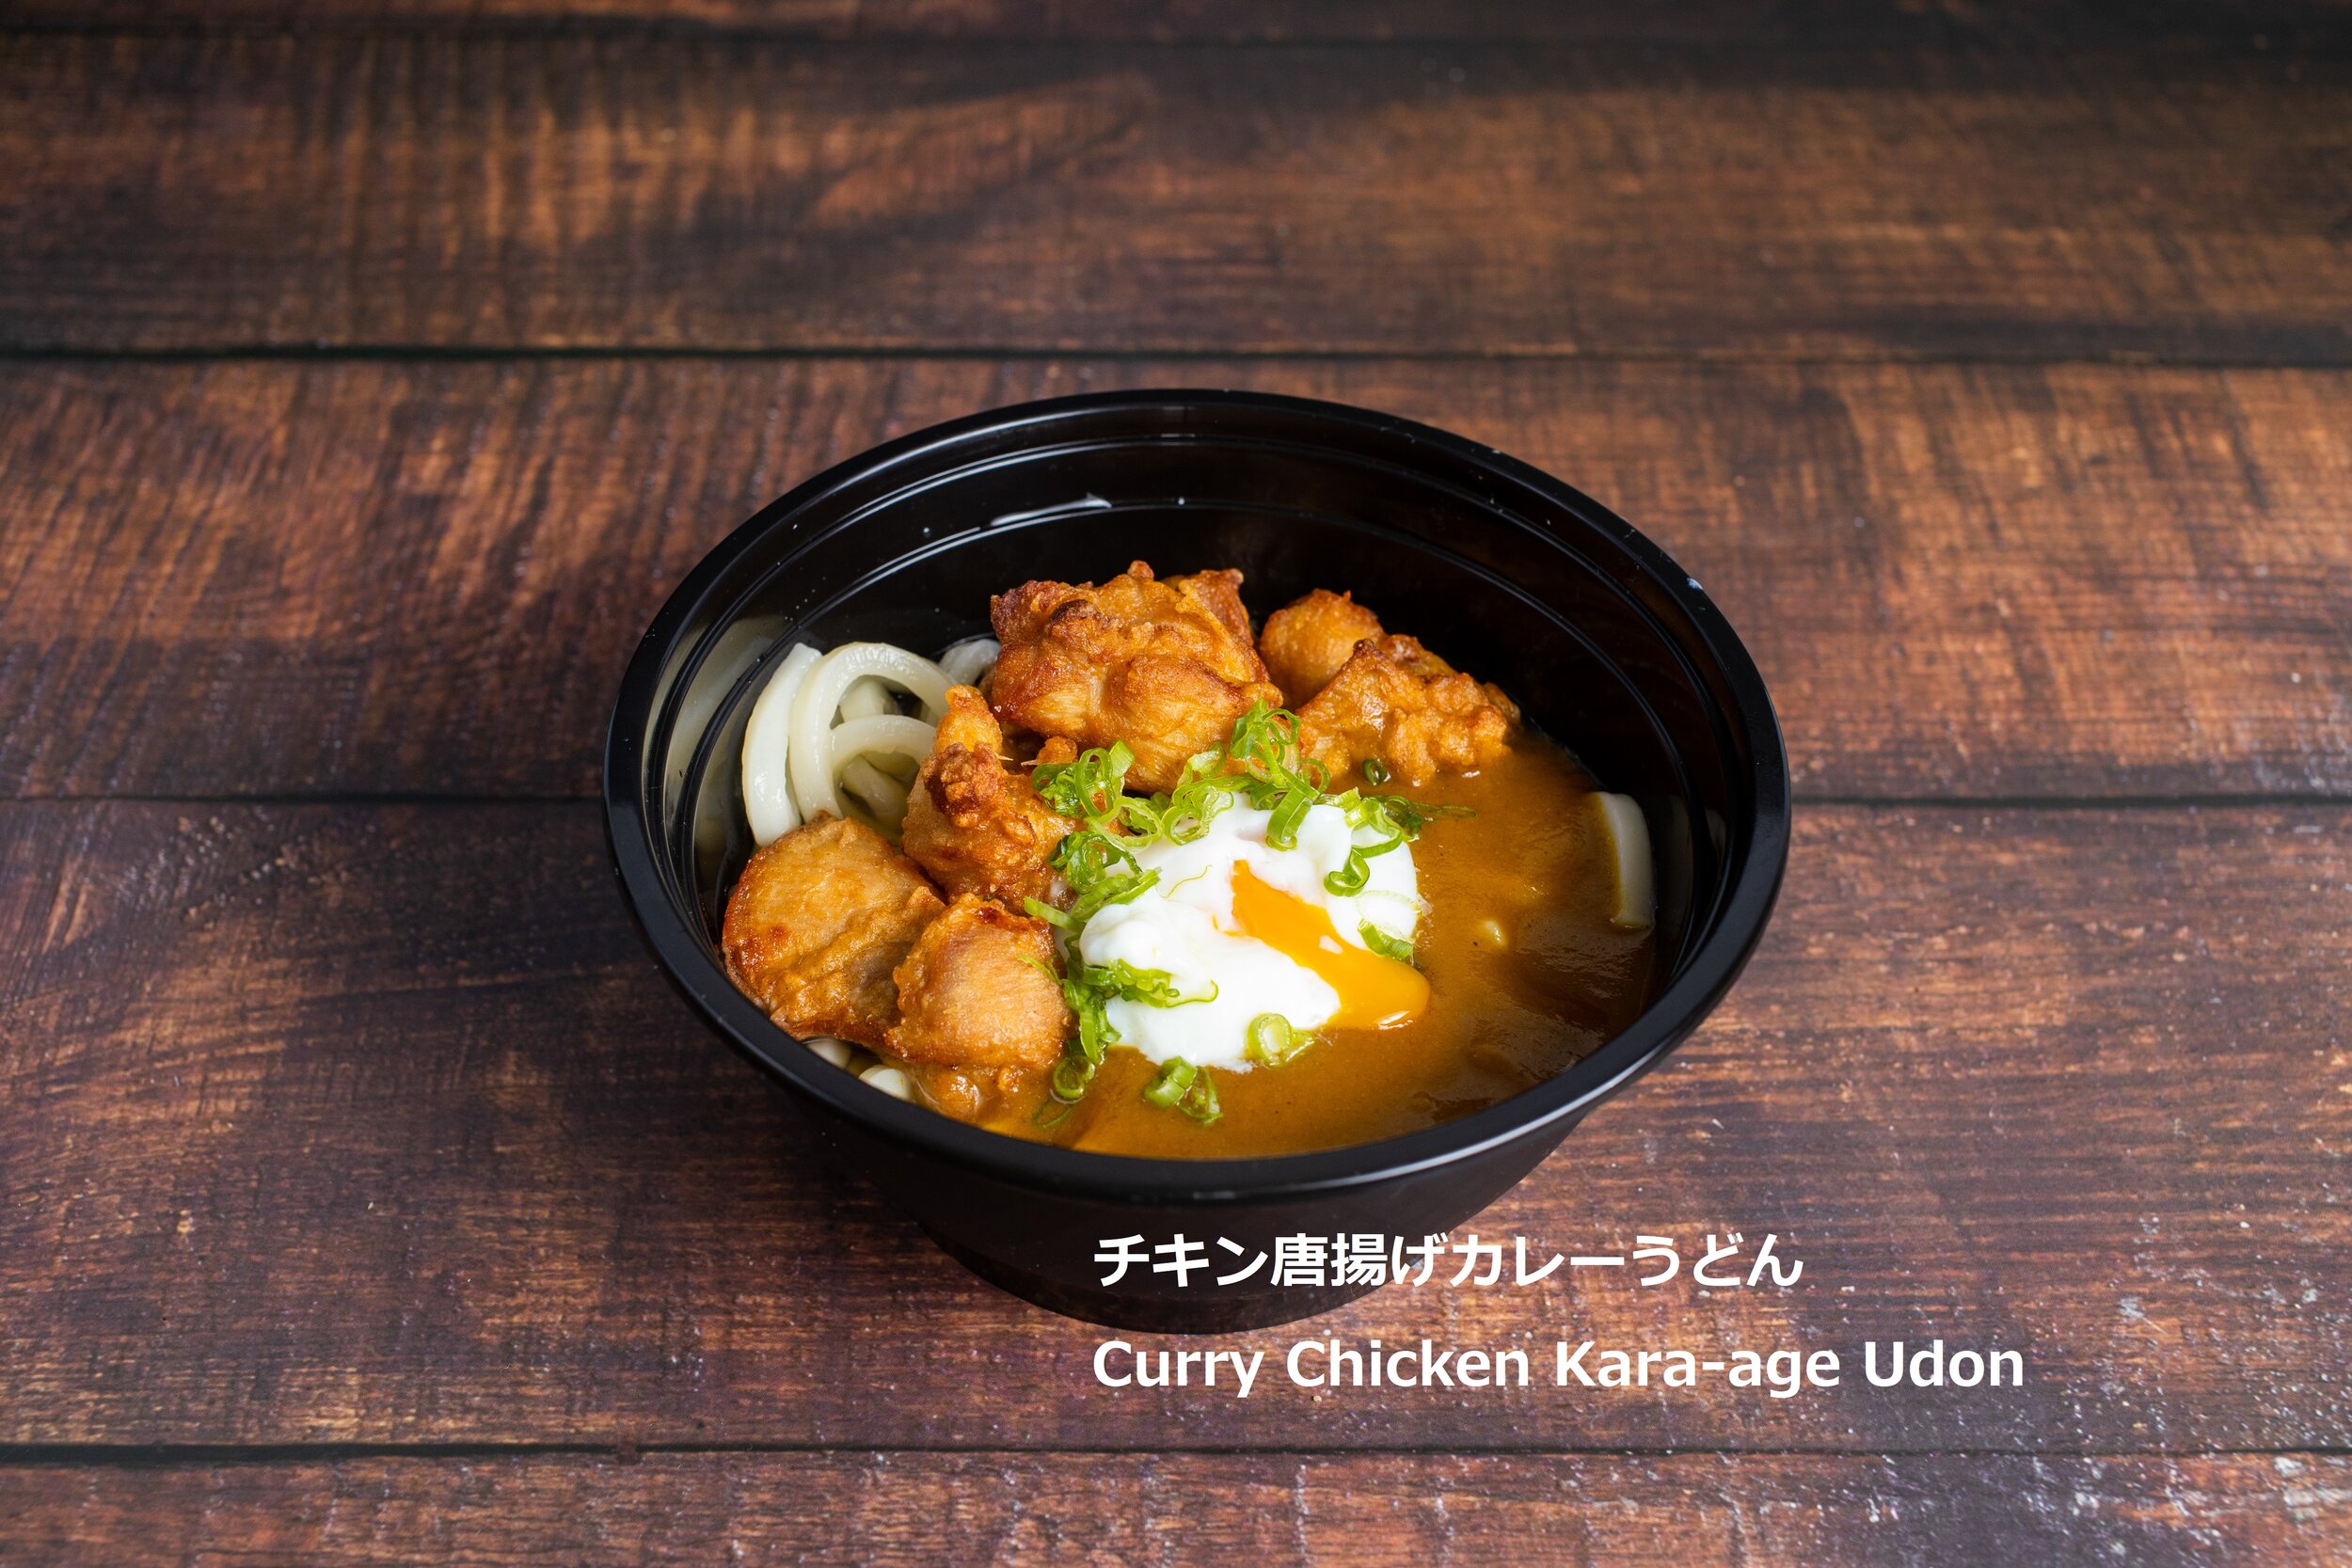 Curry Udon Recipe (カレーうどん) From Scratch